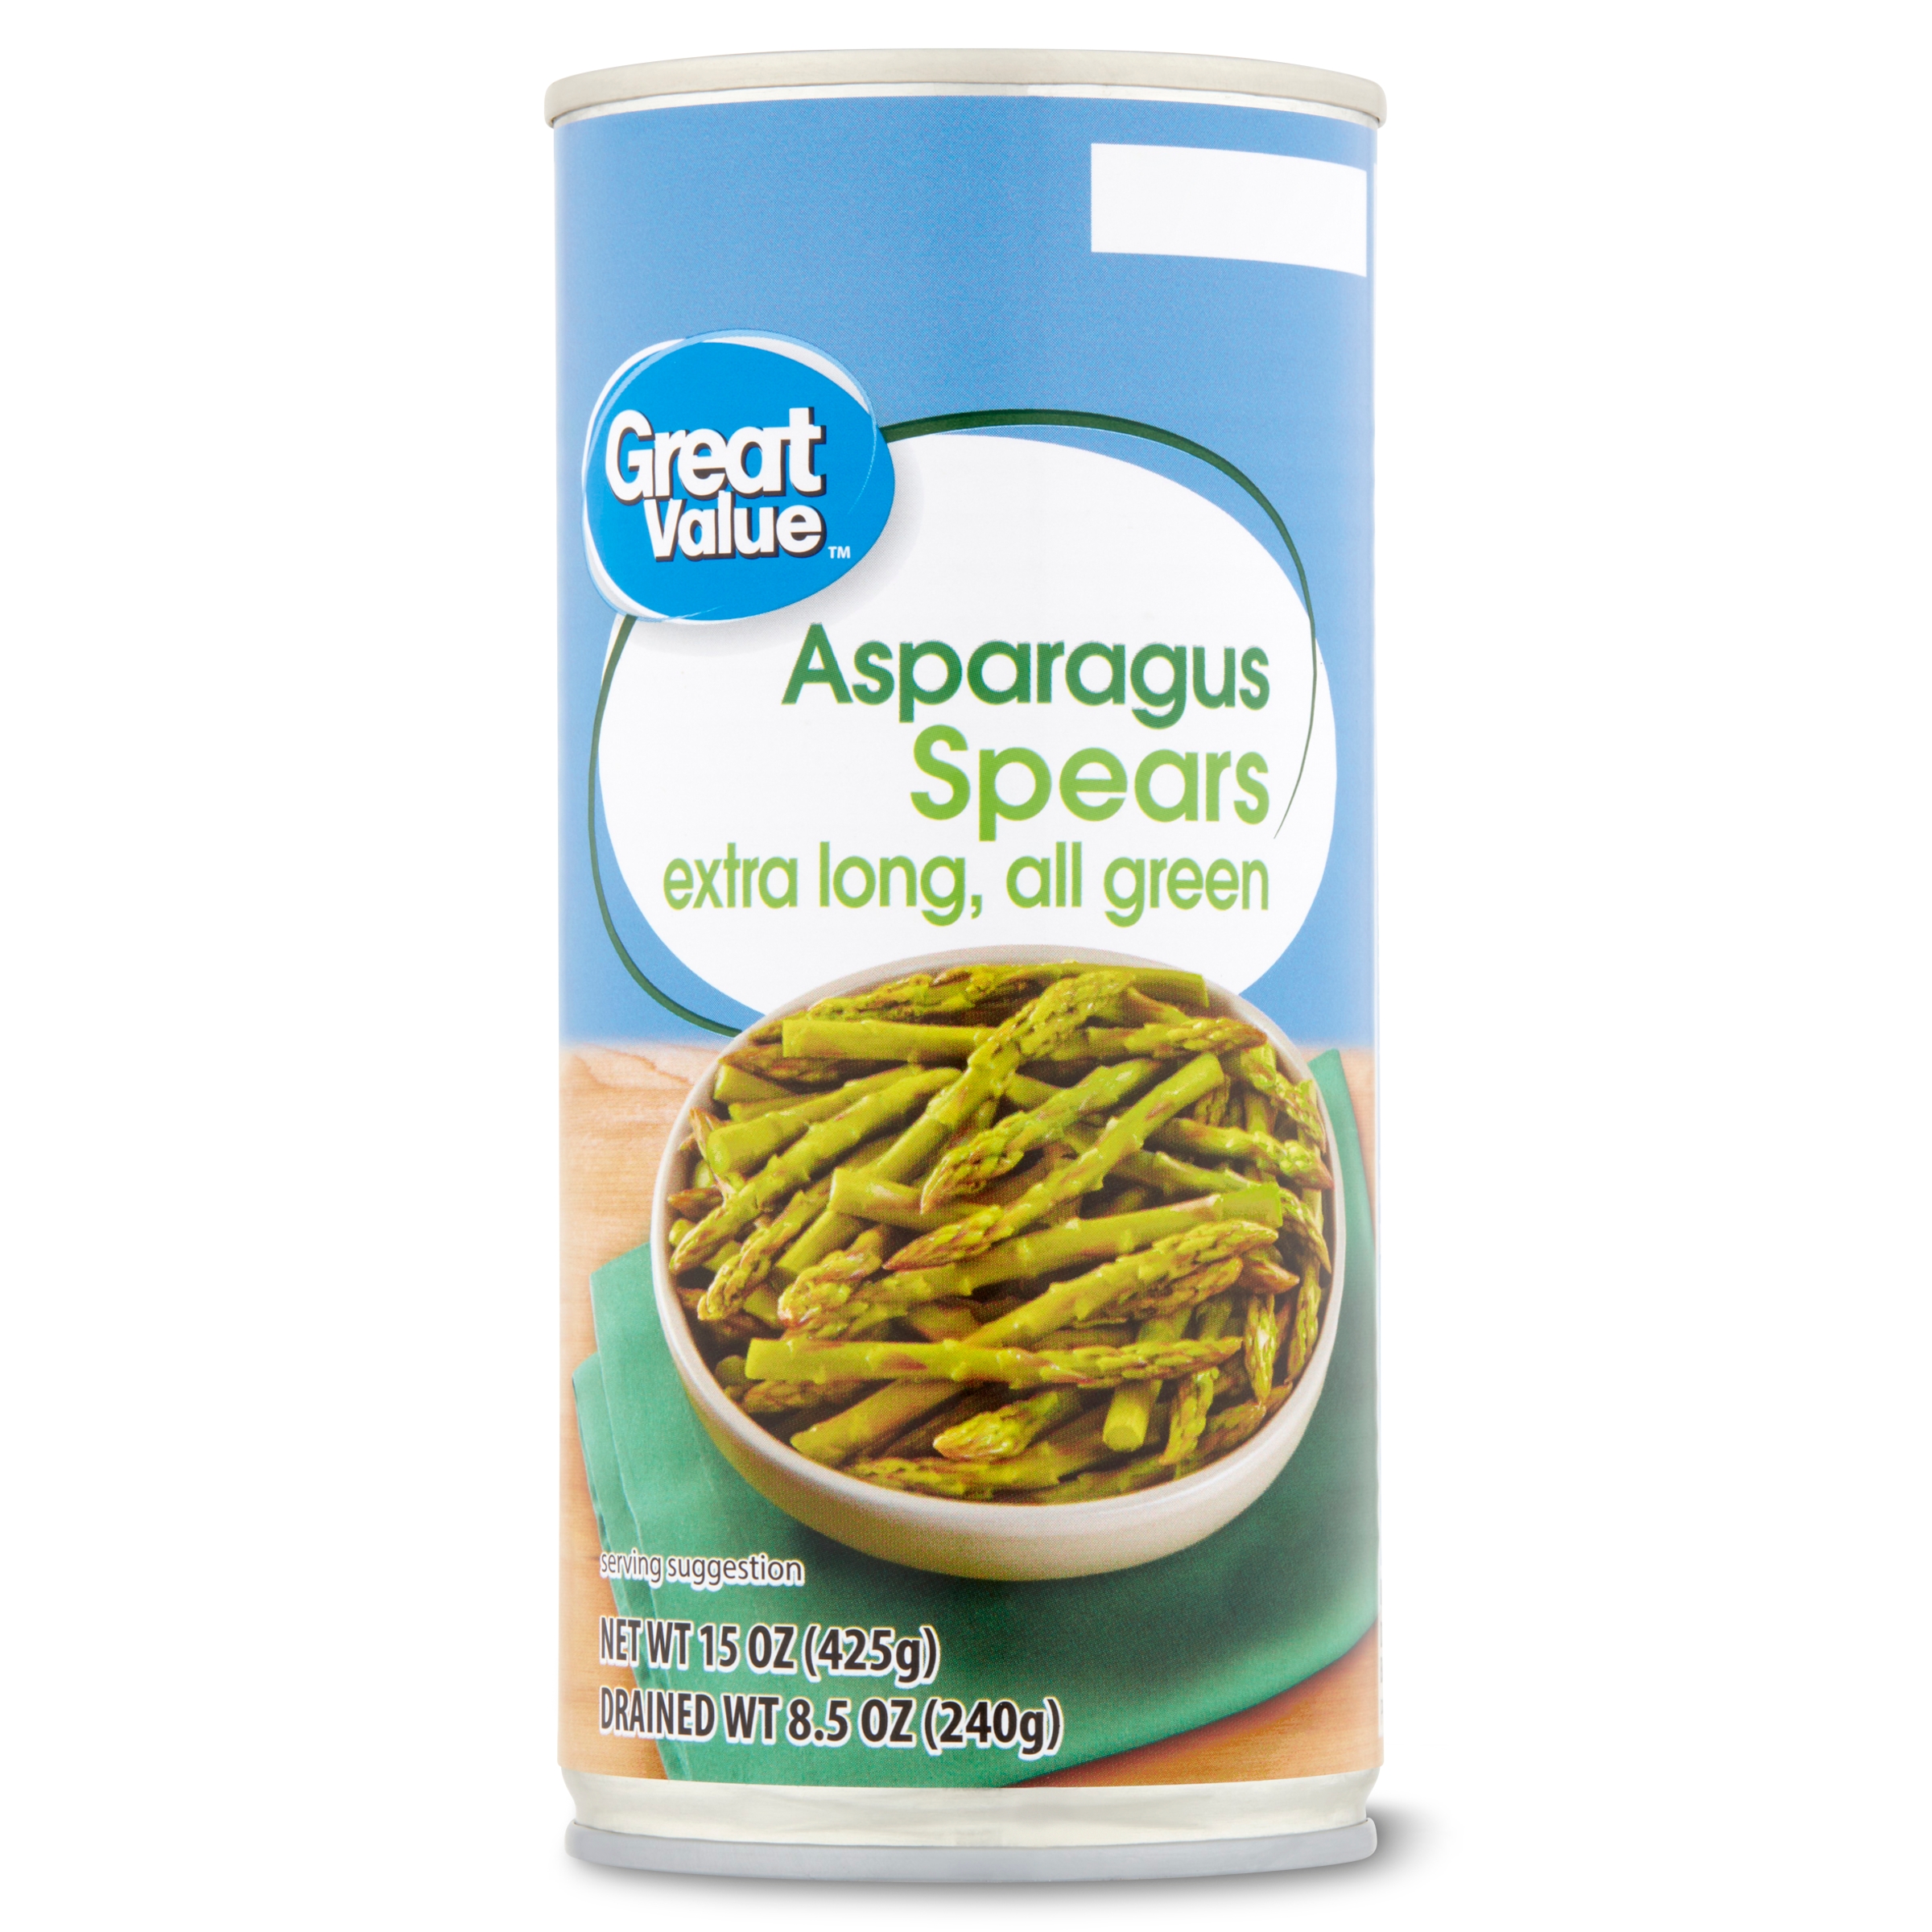 Great Value Asparagus Spears, 15 Oz - image 1 of 7